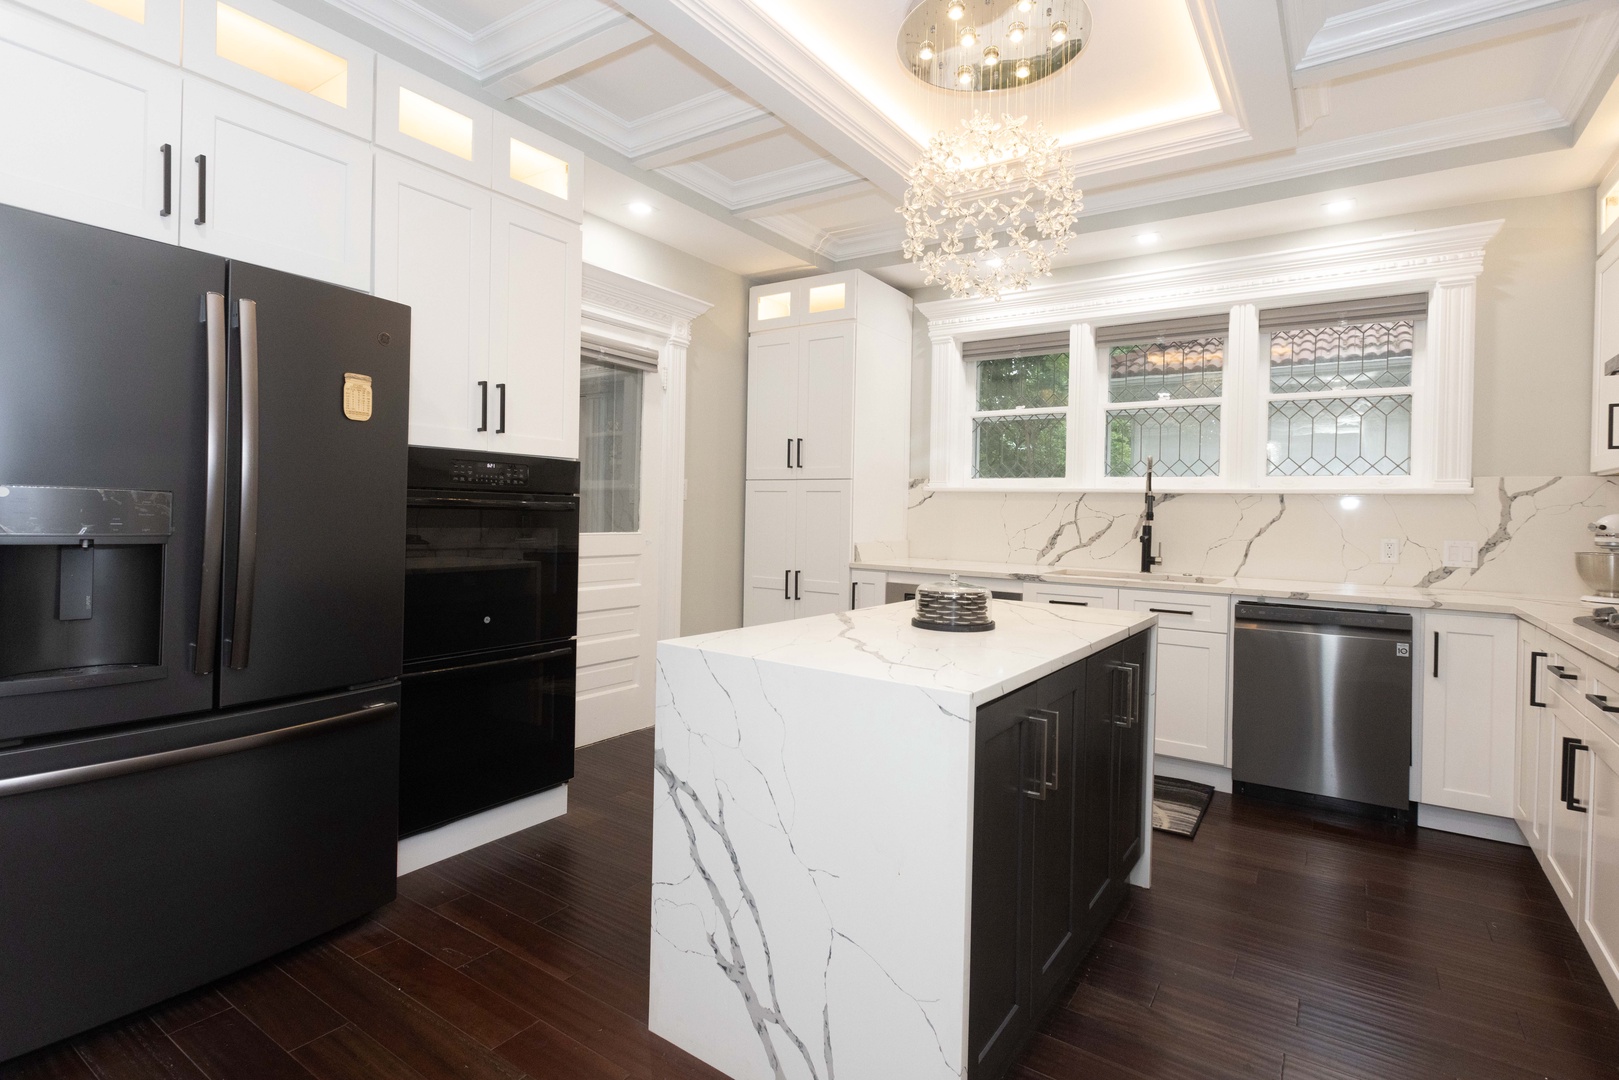 The stunning gourmet kitchen offers ample space & all the comforts of home